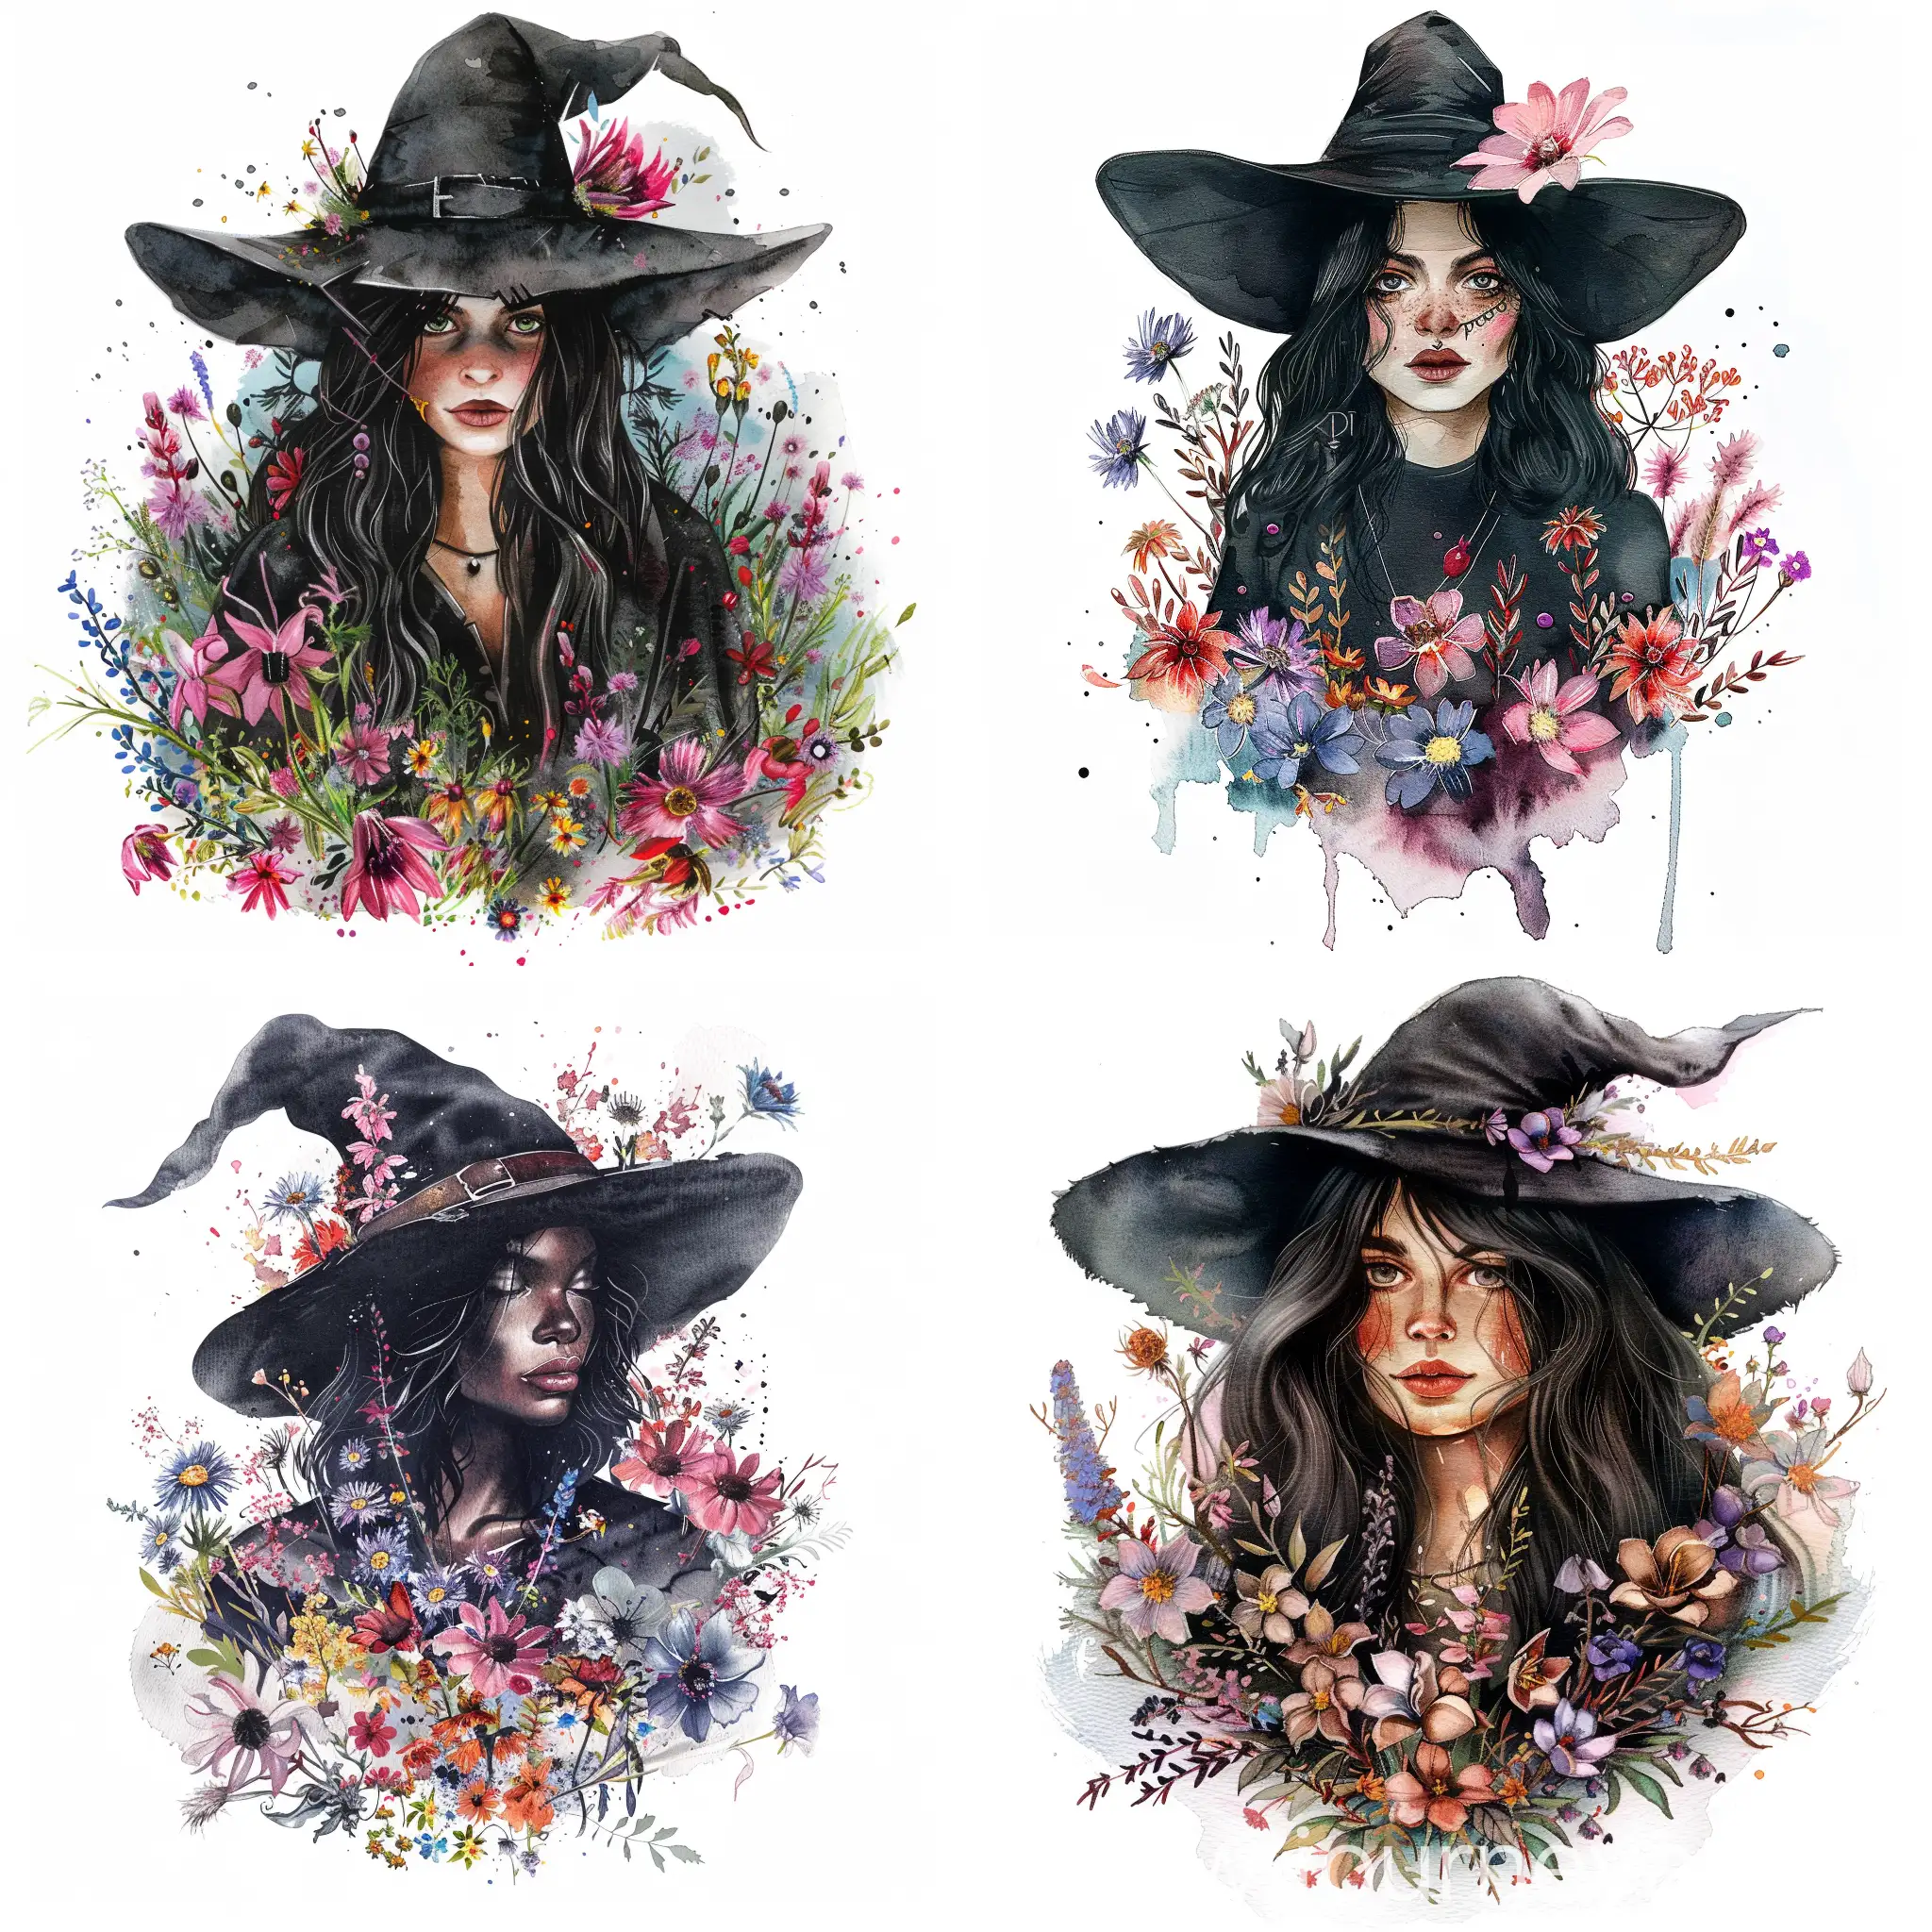 Enchanting-Black-Witch-Surrounded-by-Flowers-in-Beautiful-Gothic-Fantasy-Scene